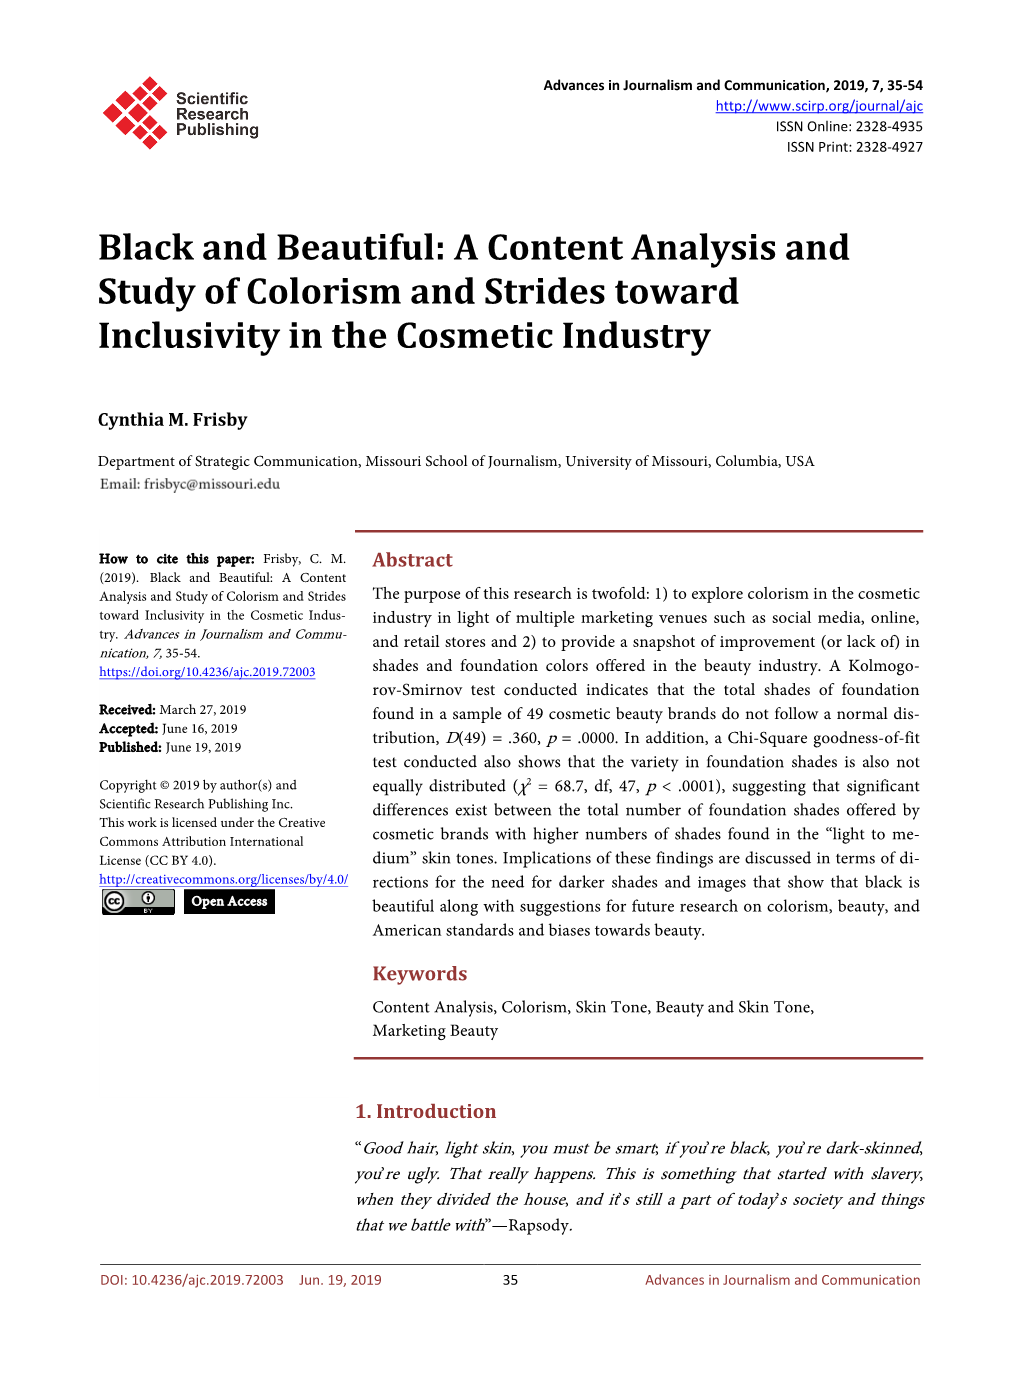 Black and Beautiful: a Content Analysis and Study of Colorism and Strides Toward Inclusivity in the Cosmetic Industry